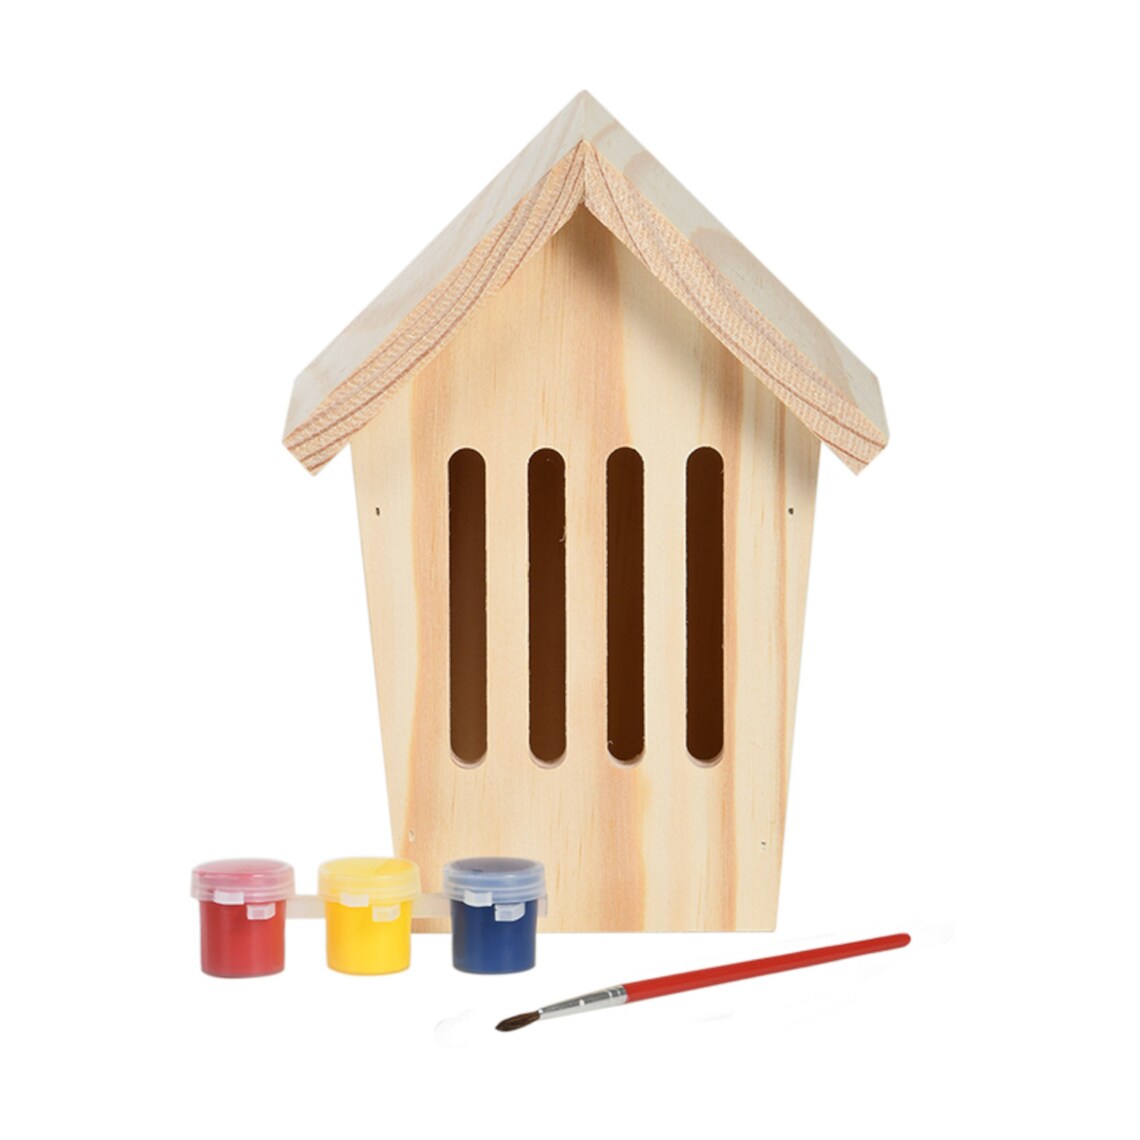 Paint Your Own Butterfly House